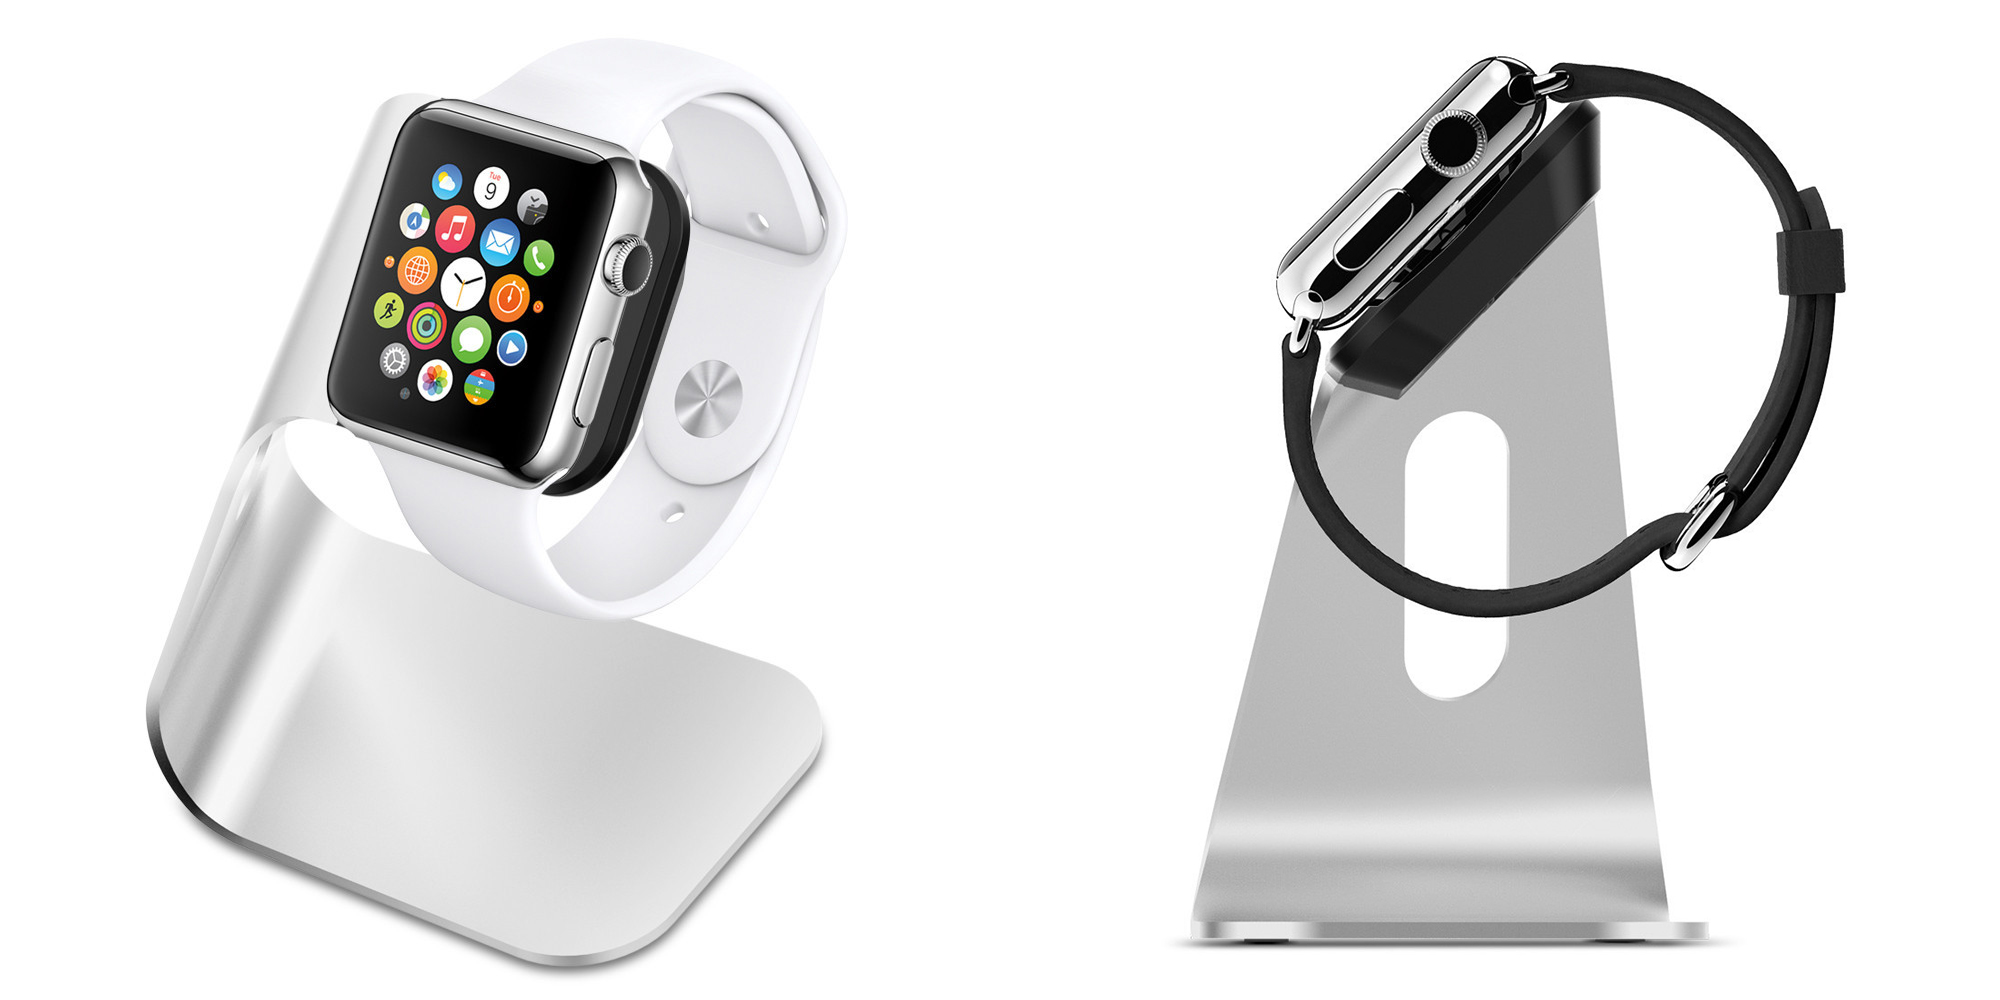 Spigen's aluminum Apple Watch Stand is down to just $8 with free shipping  (Reg. $16)